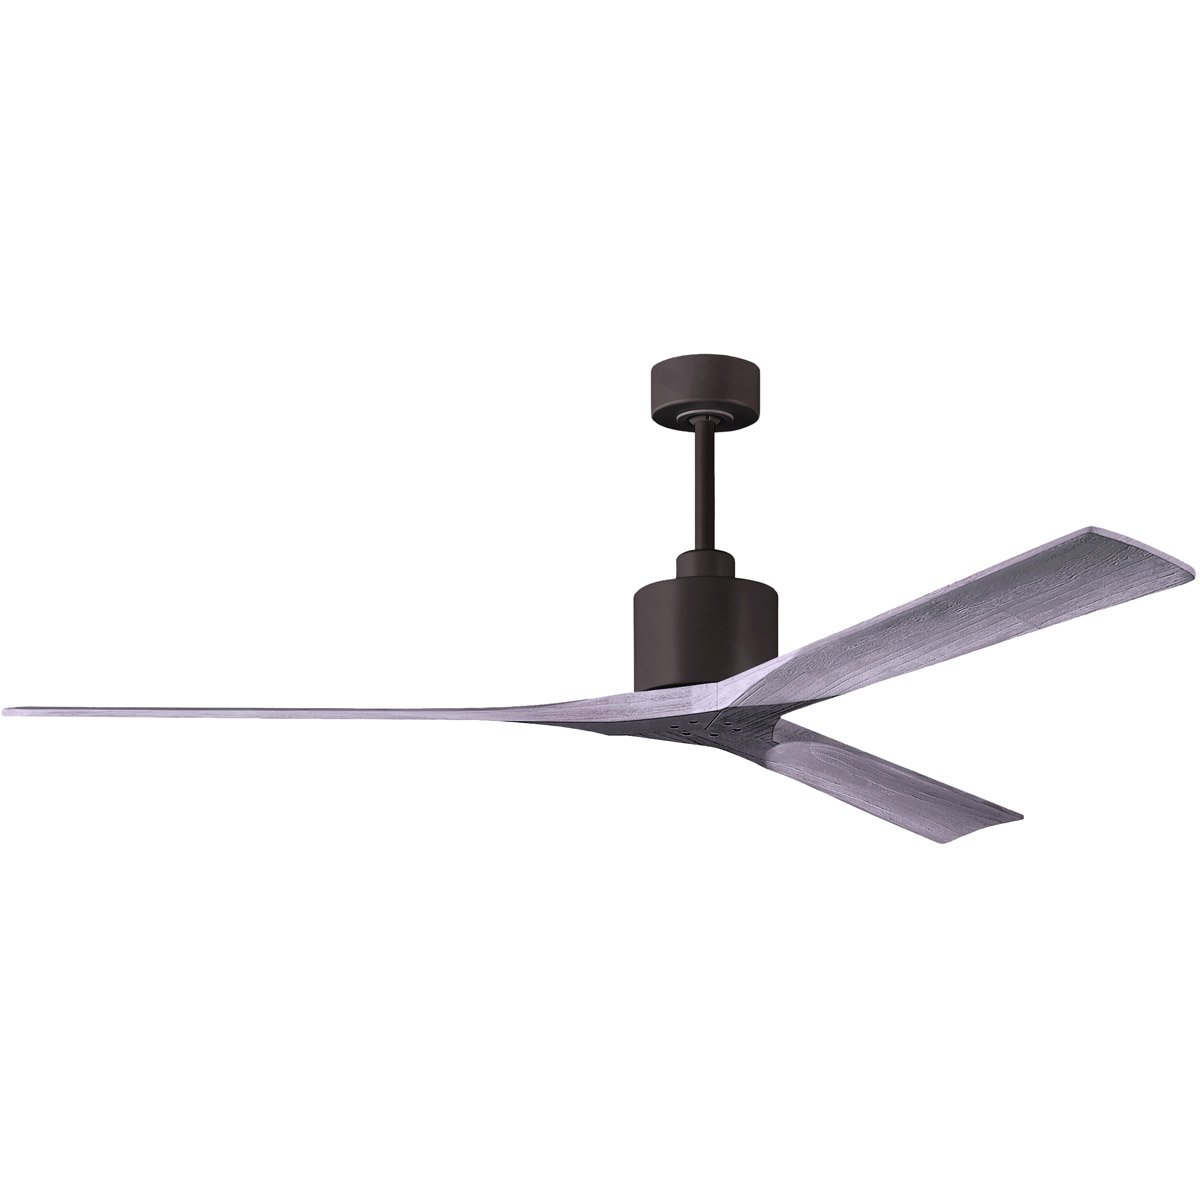 Picture of Atlas NKXL-TB-LM-72 72 in. Light Maple Tone Blades Nan XL Ceiling Fan, Textured Bronze